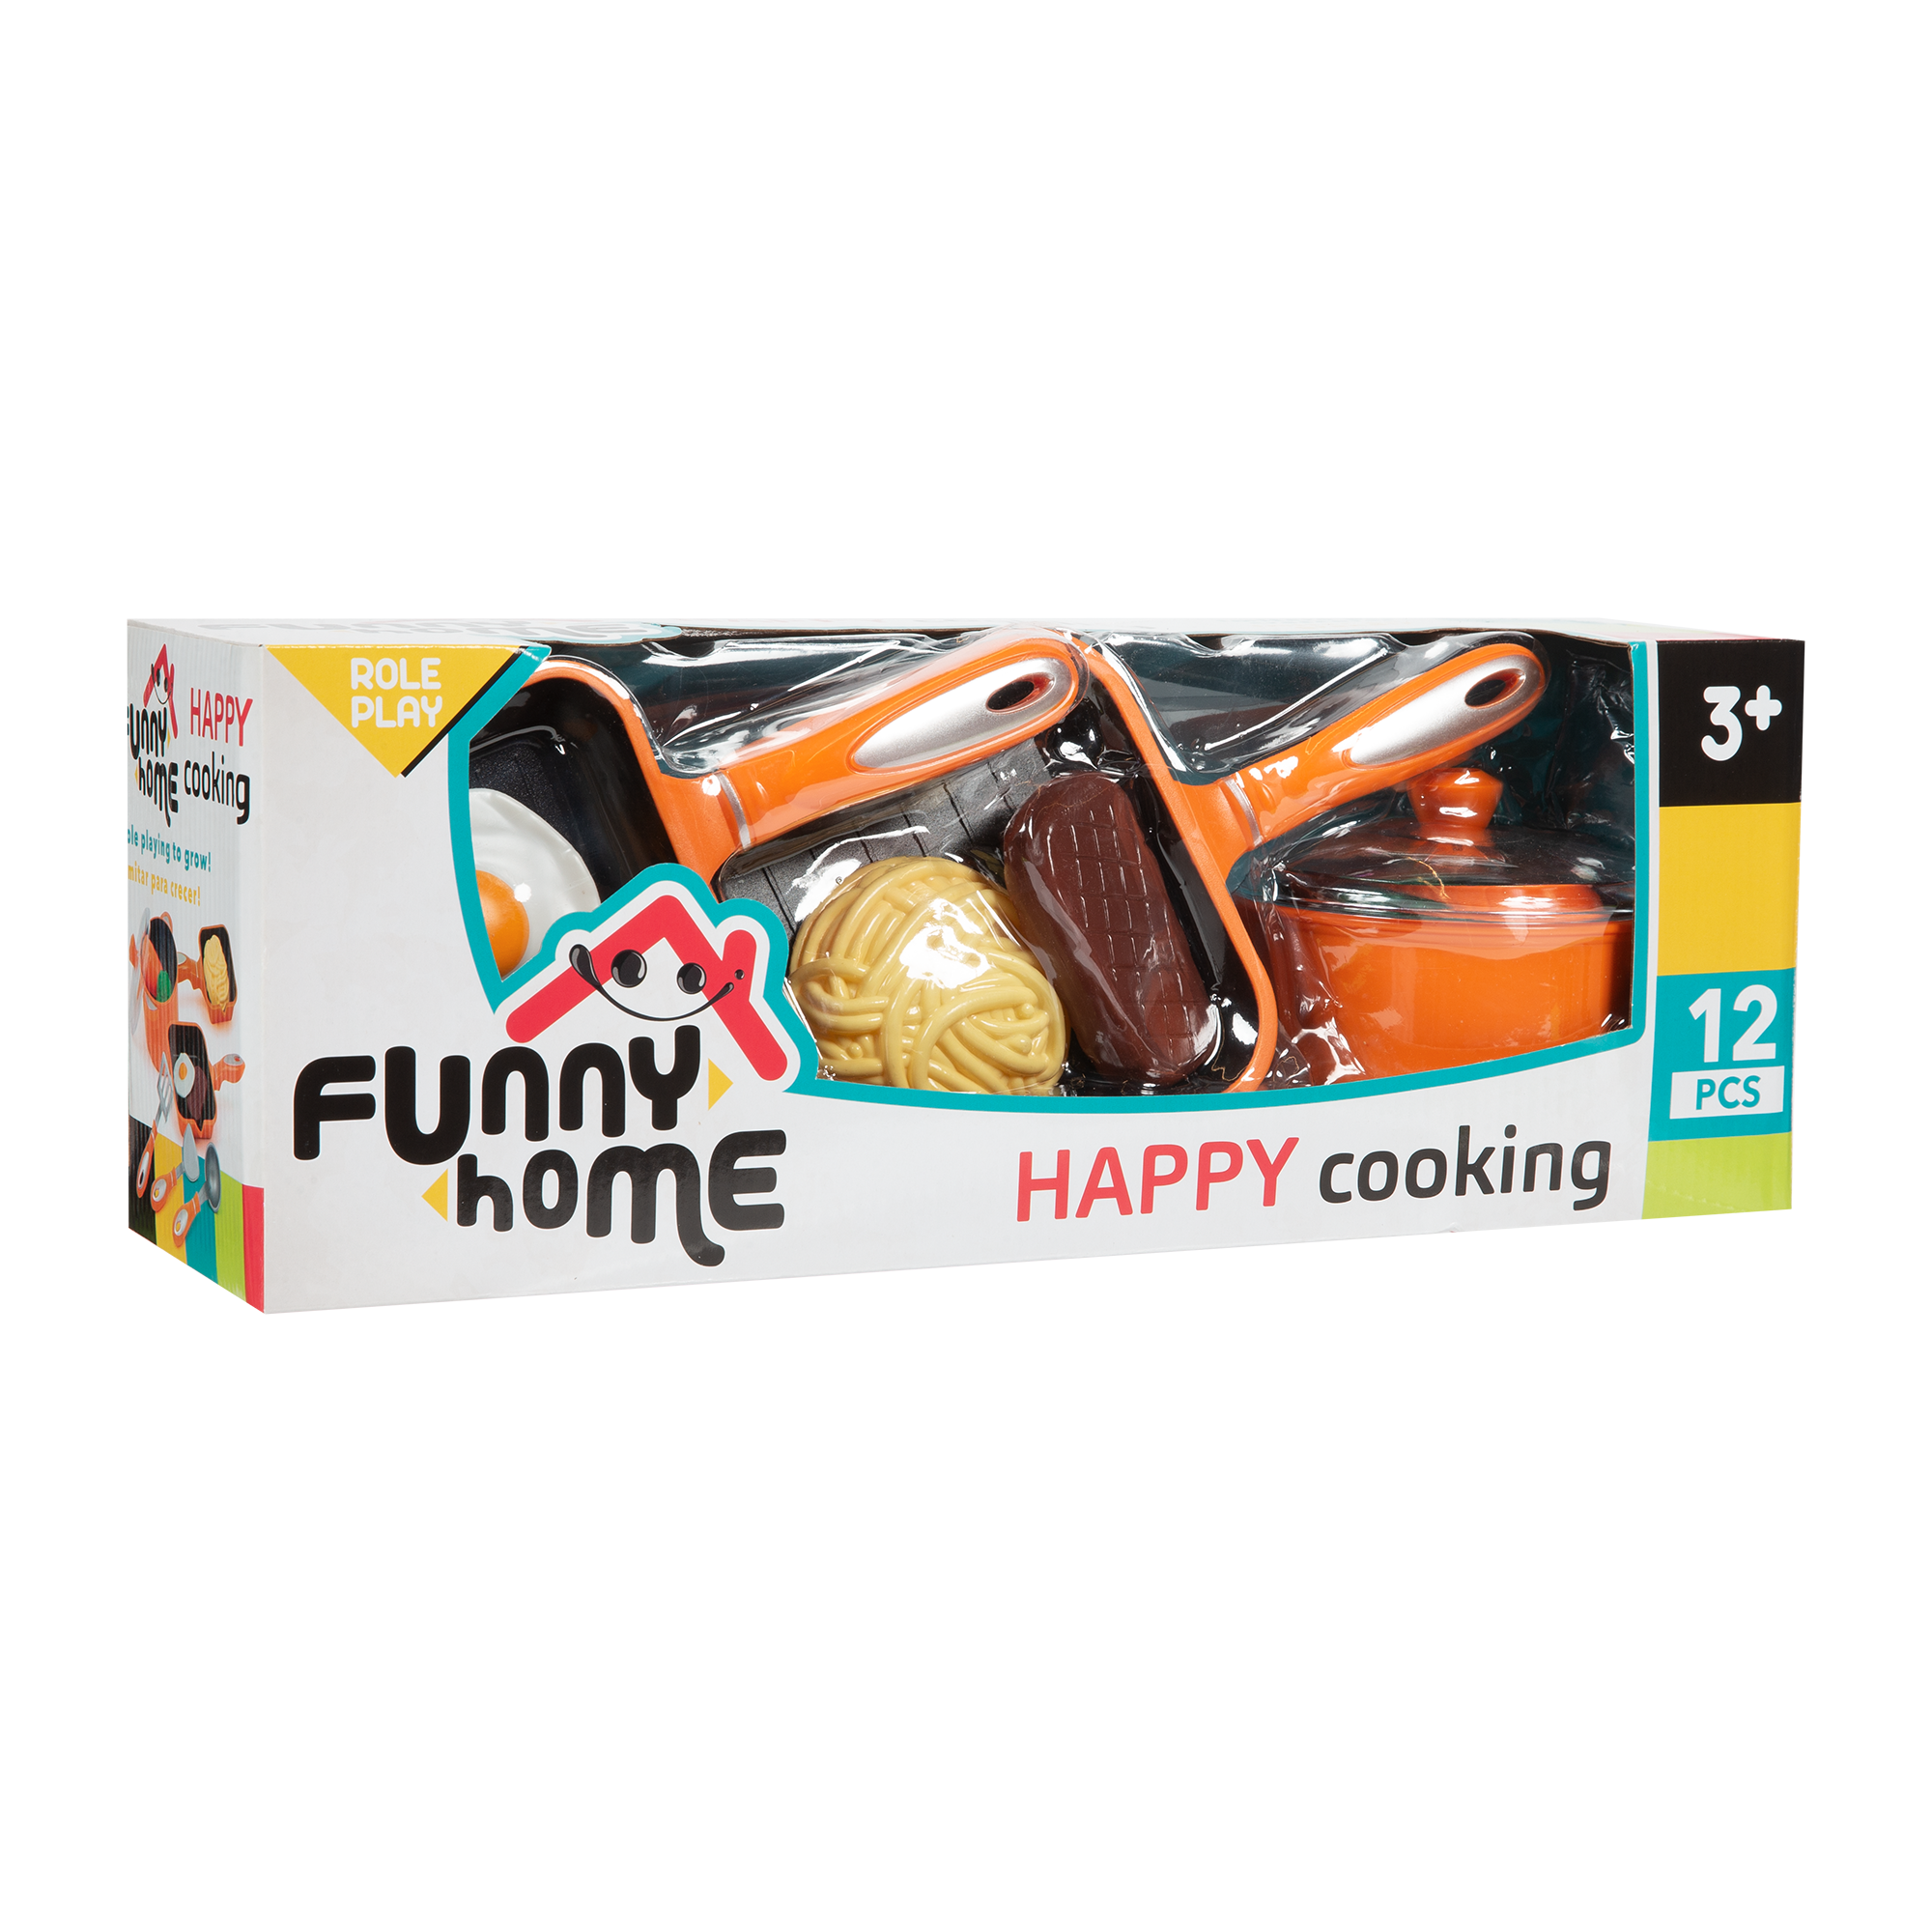 Happy cooking - FUNNY HOME